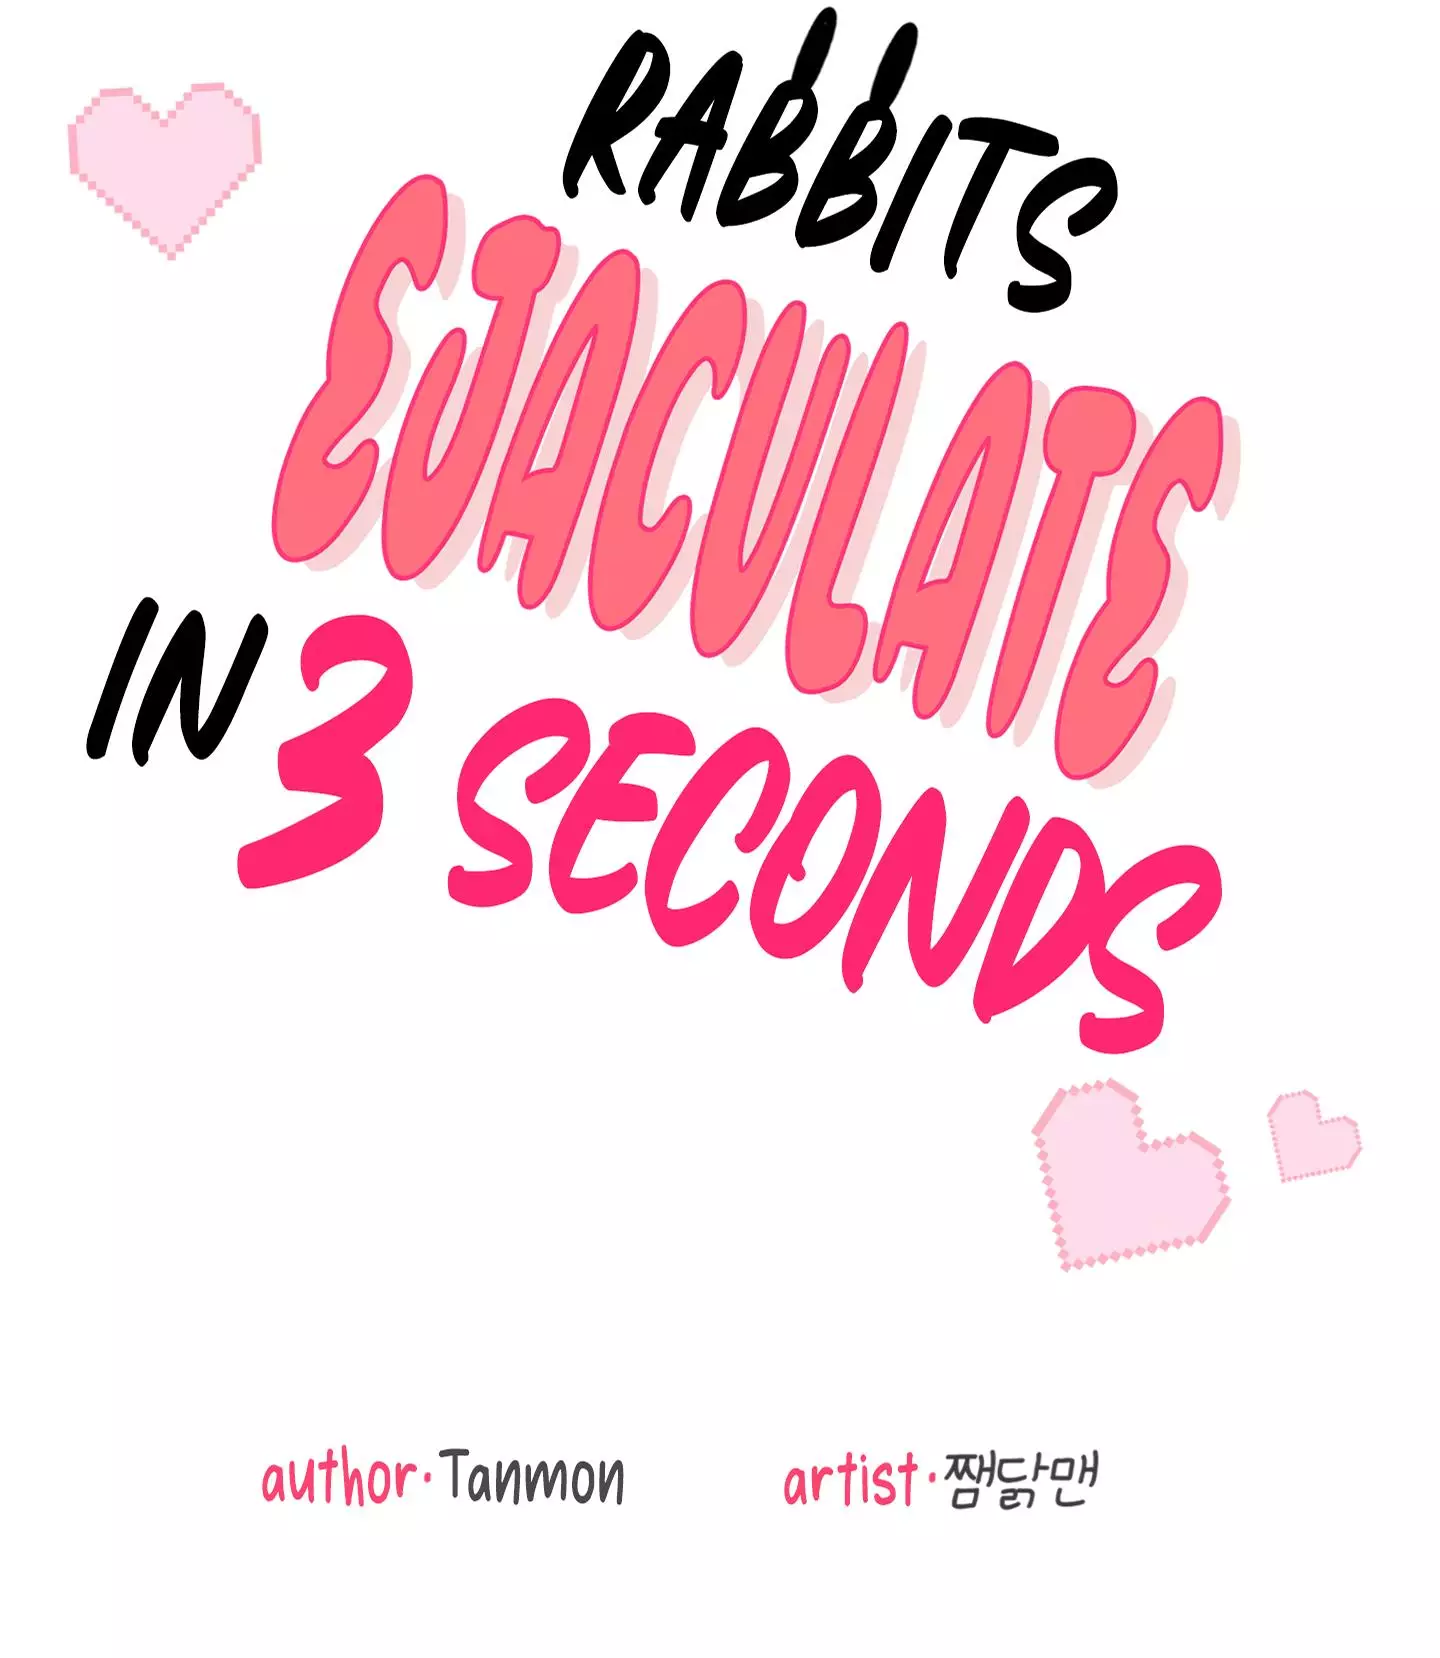 Rabbits Ejaculate In 3 Seconds - 3 page 33-83b41113